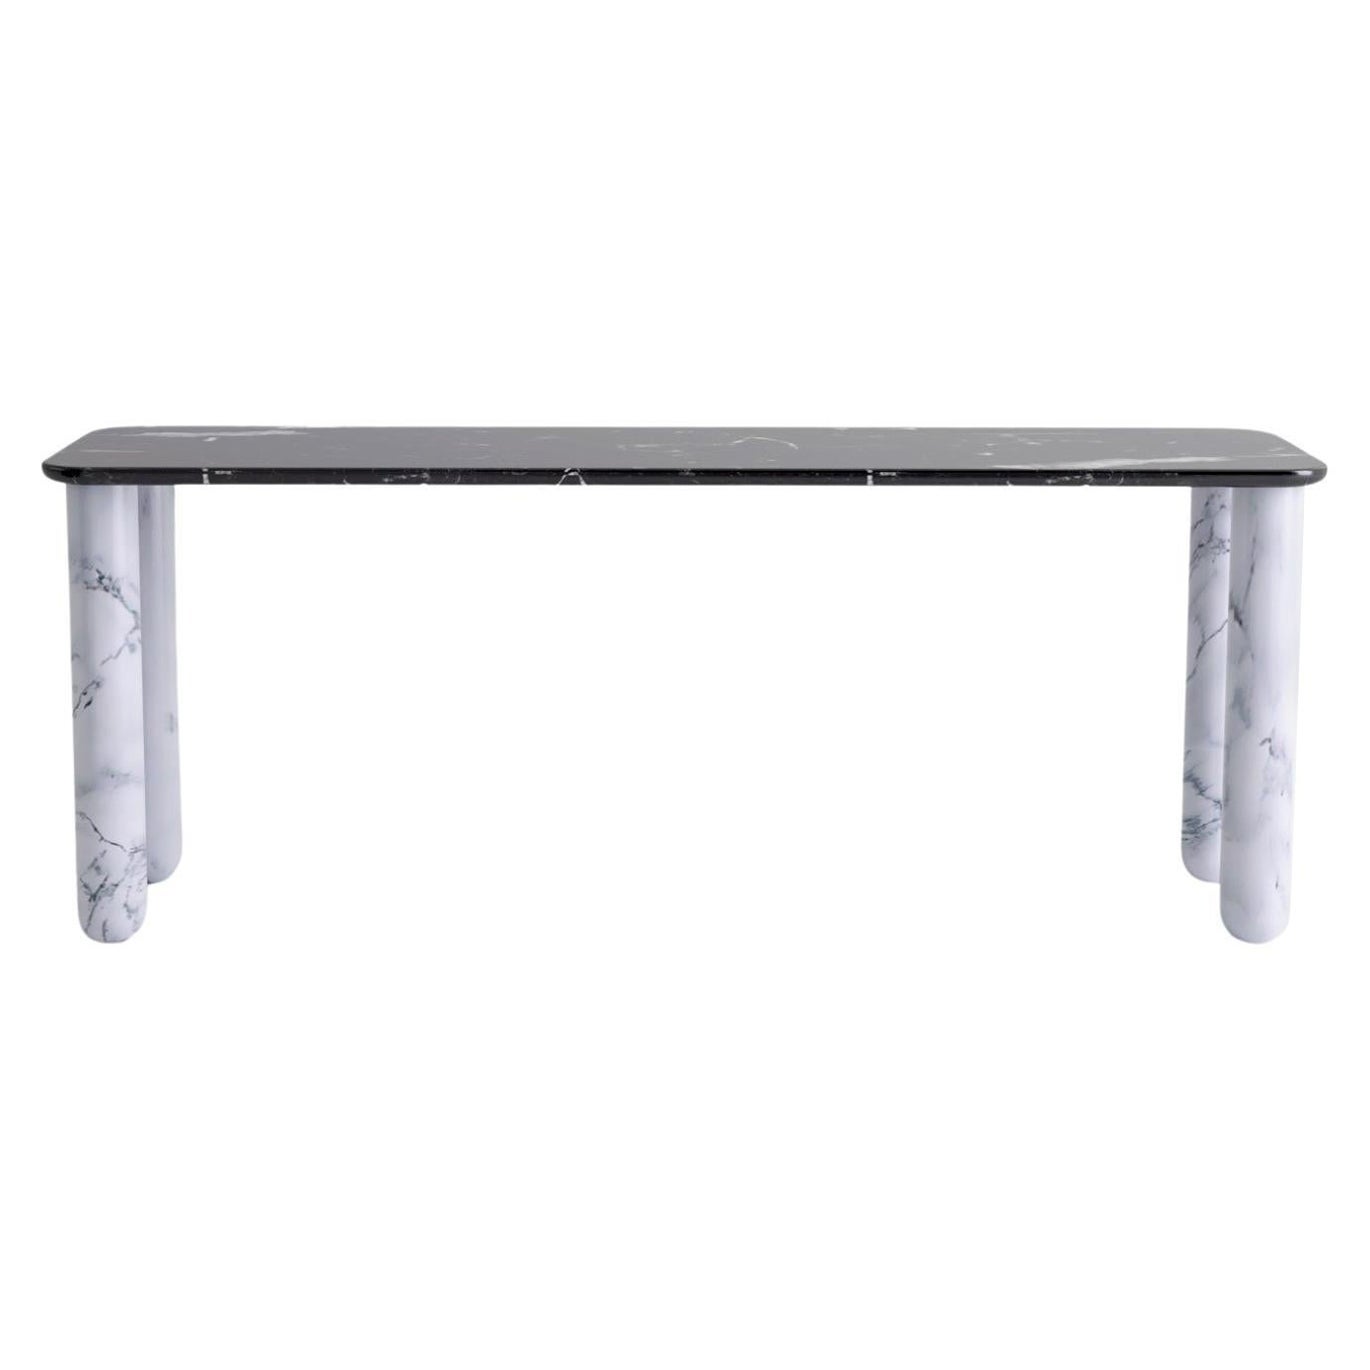 Large Black and White Marble "Sunday" Dining Table, Jean-Baptiste Souletie For Sale